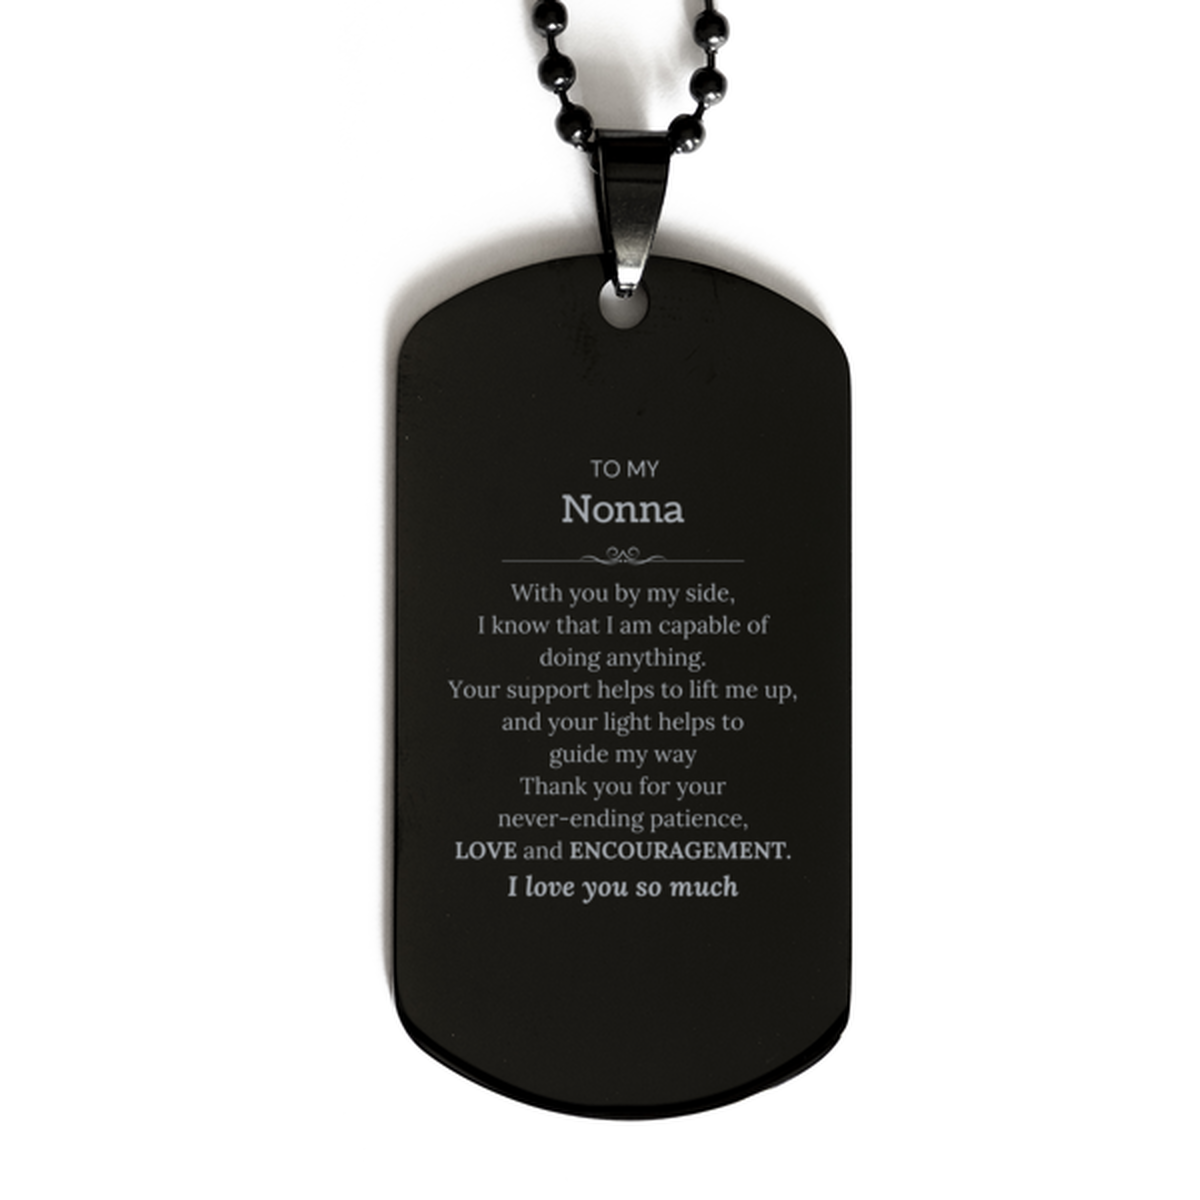 Appreciation Nonna Black Dog Tag Gifts, To My Nonna Birthday Christmas Wedding Keepsake Gifts for Nonna With you by my side, I know that I am capable of doing anything. I love you so much